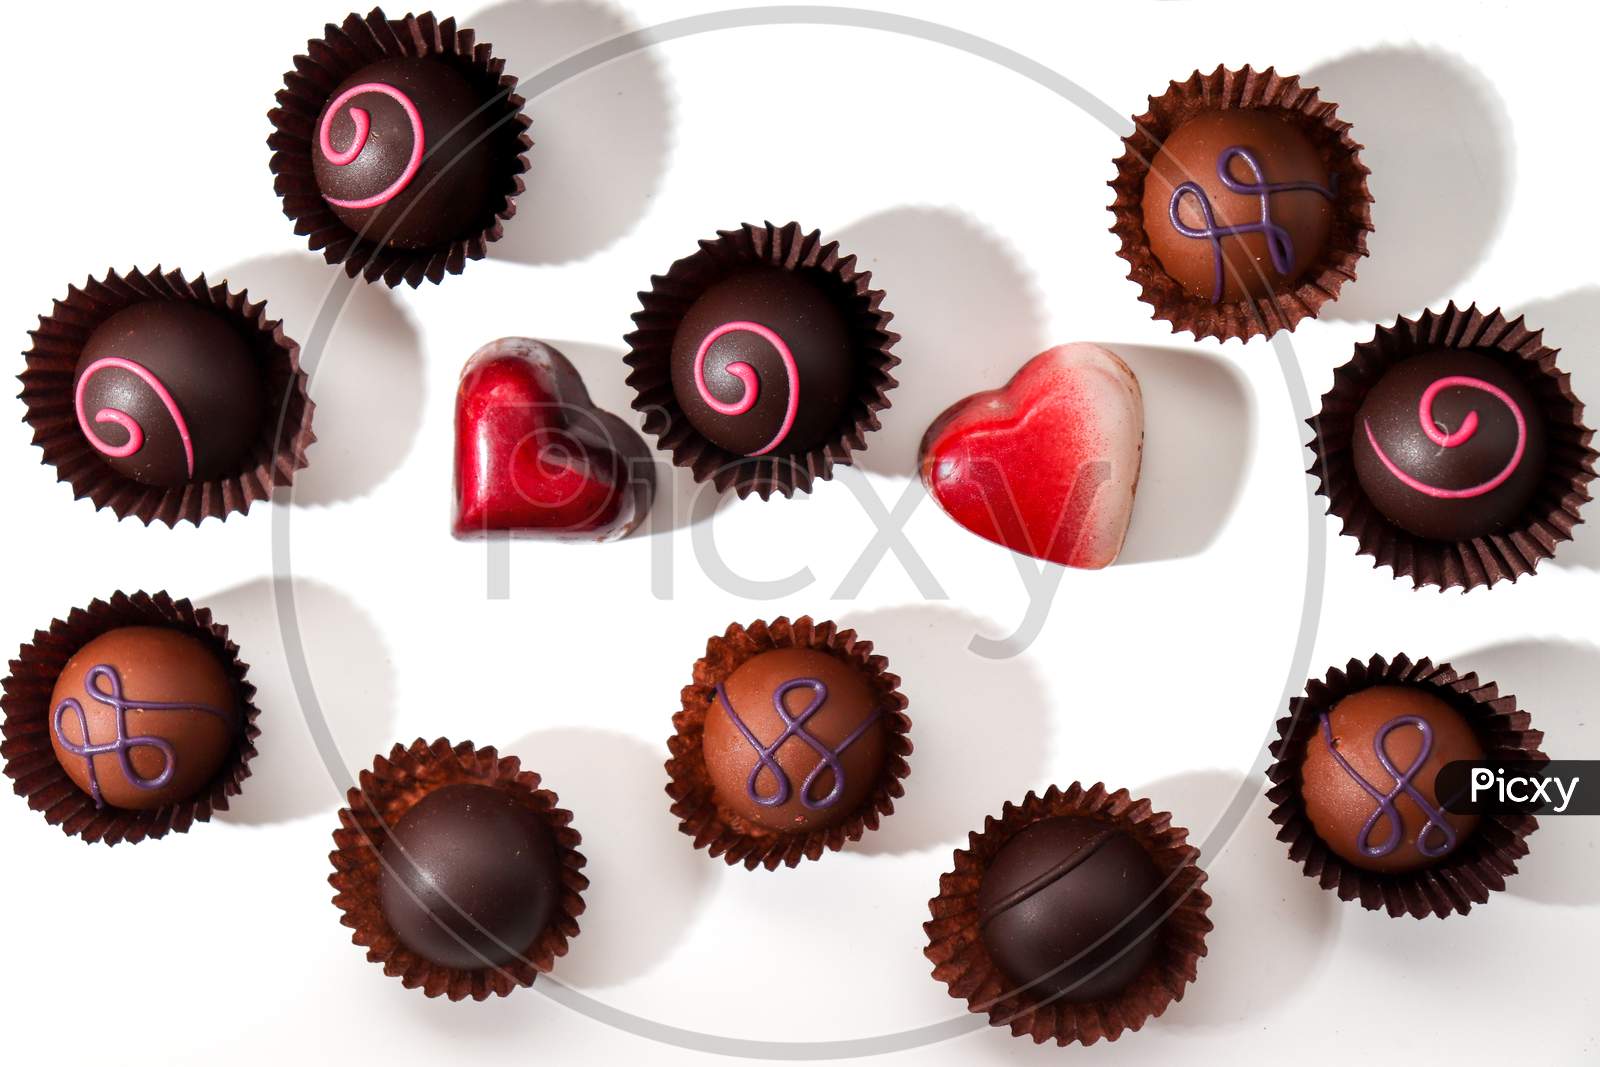 Variety Of Delicious Chocolate Pralines From Poland On A White Background.